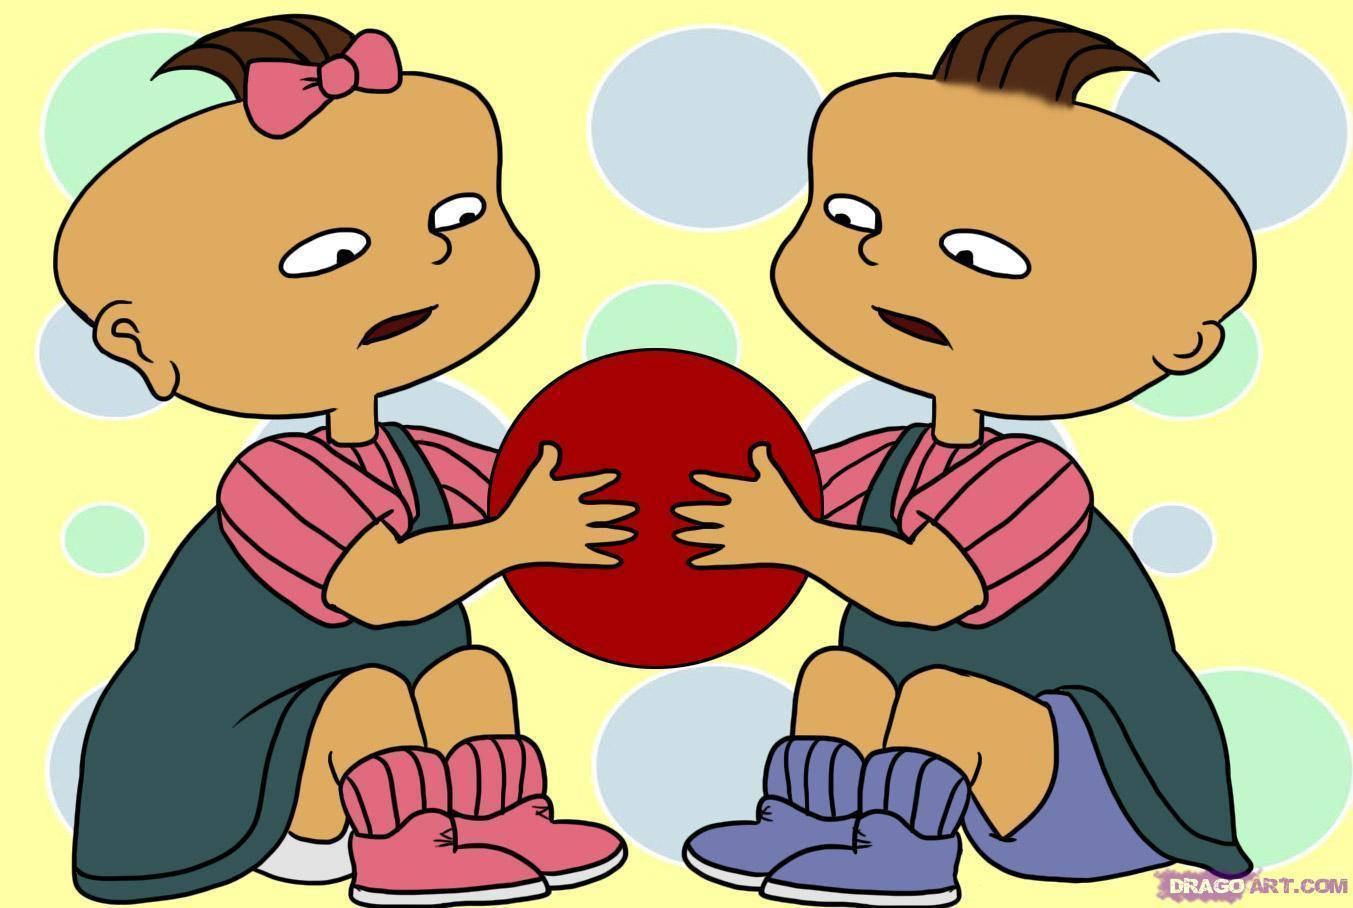 Two Cartoon Babies Playing With A Red Ball